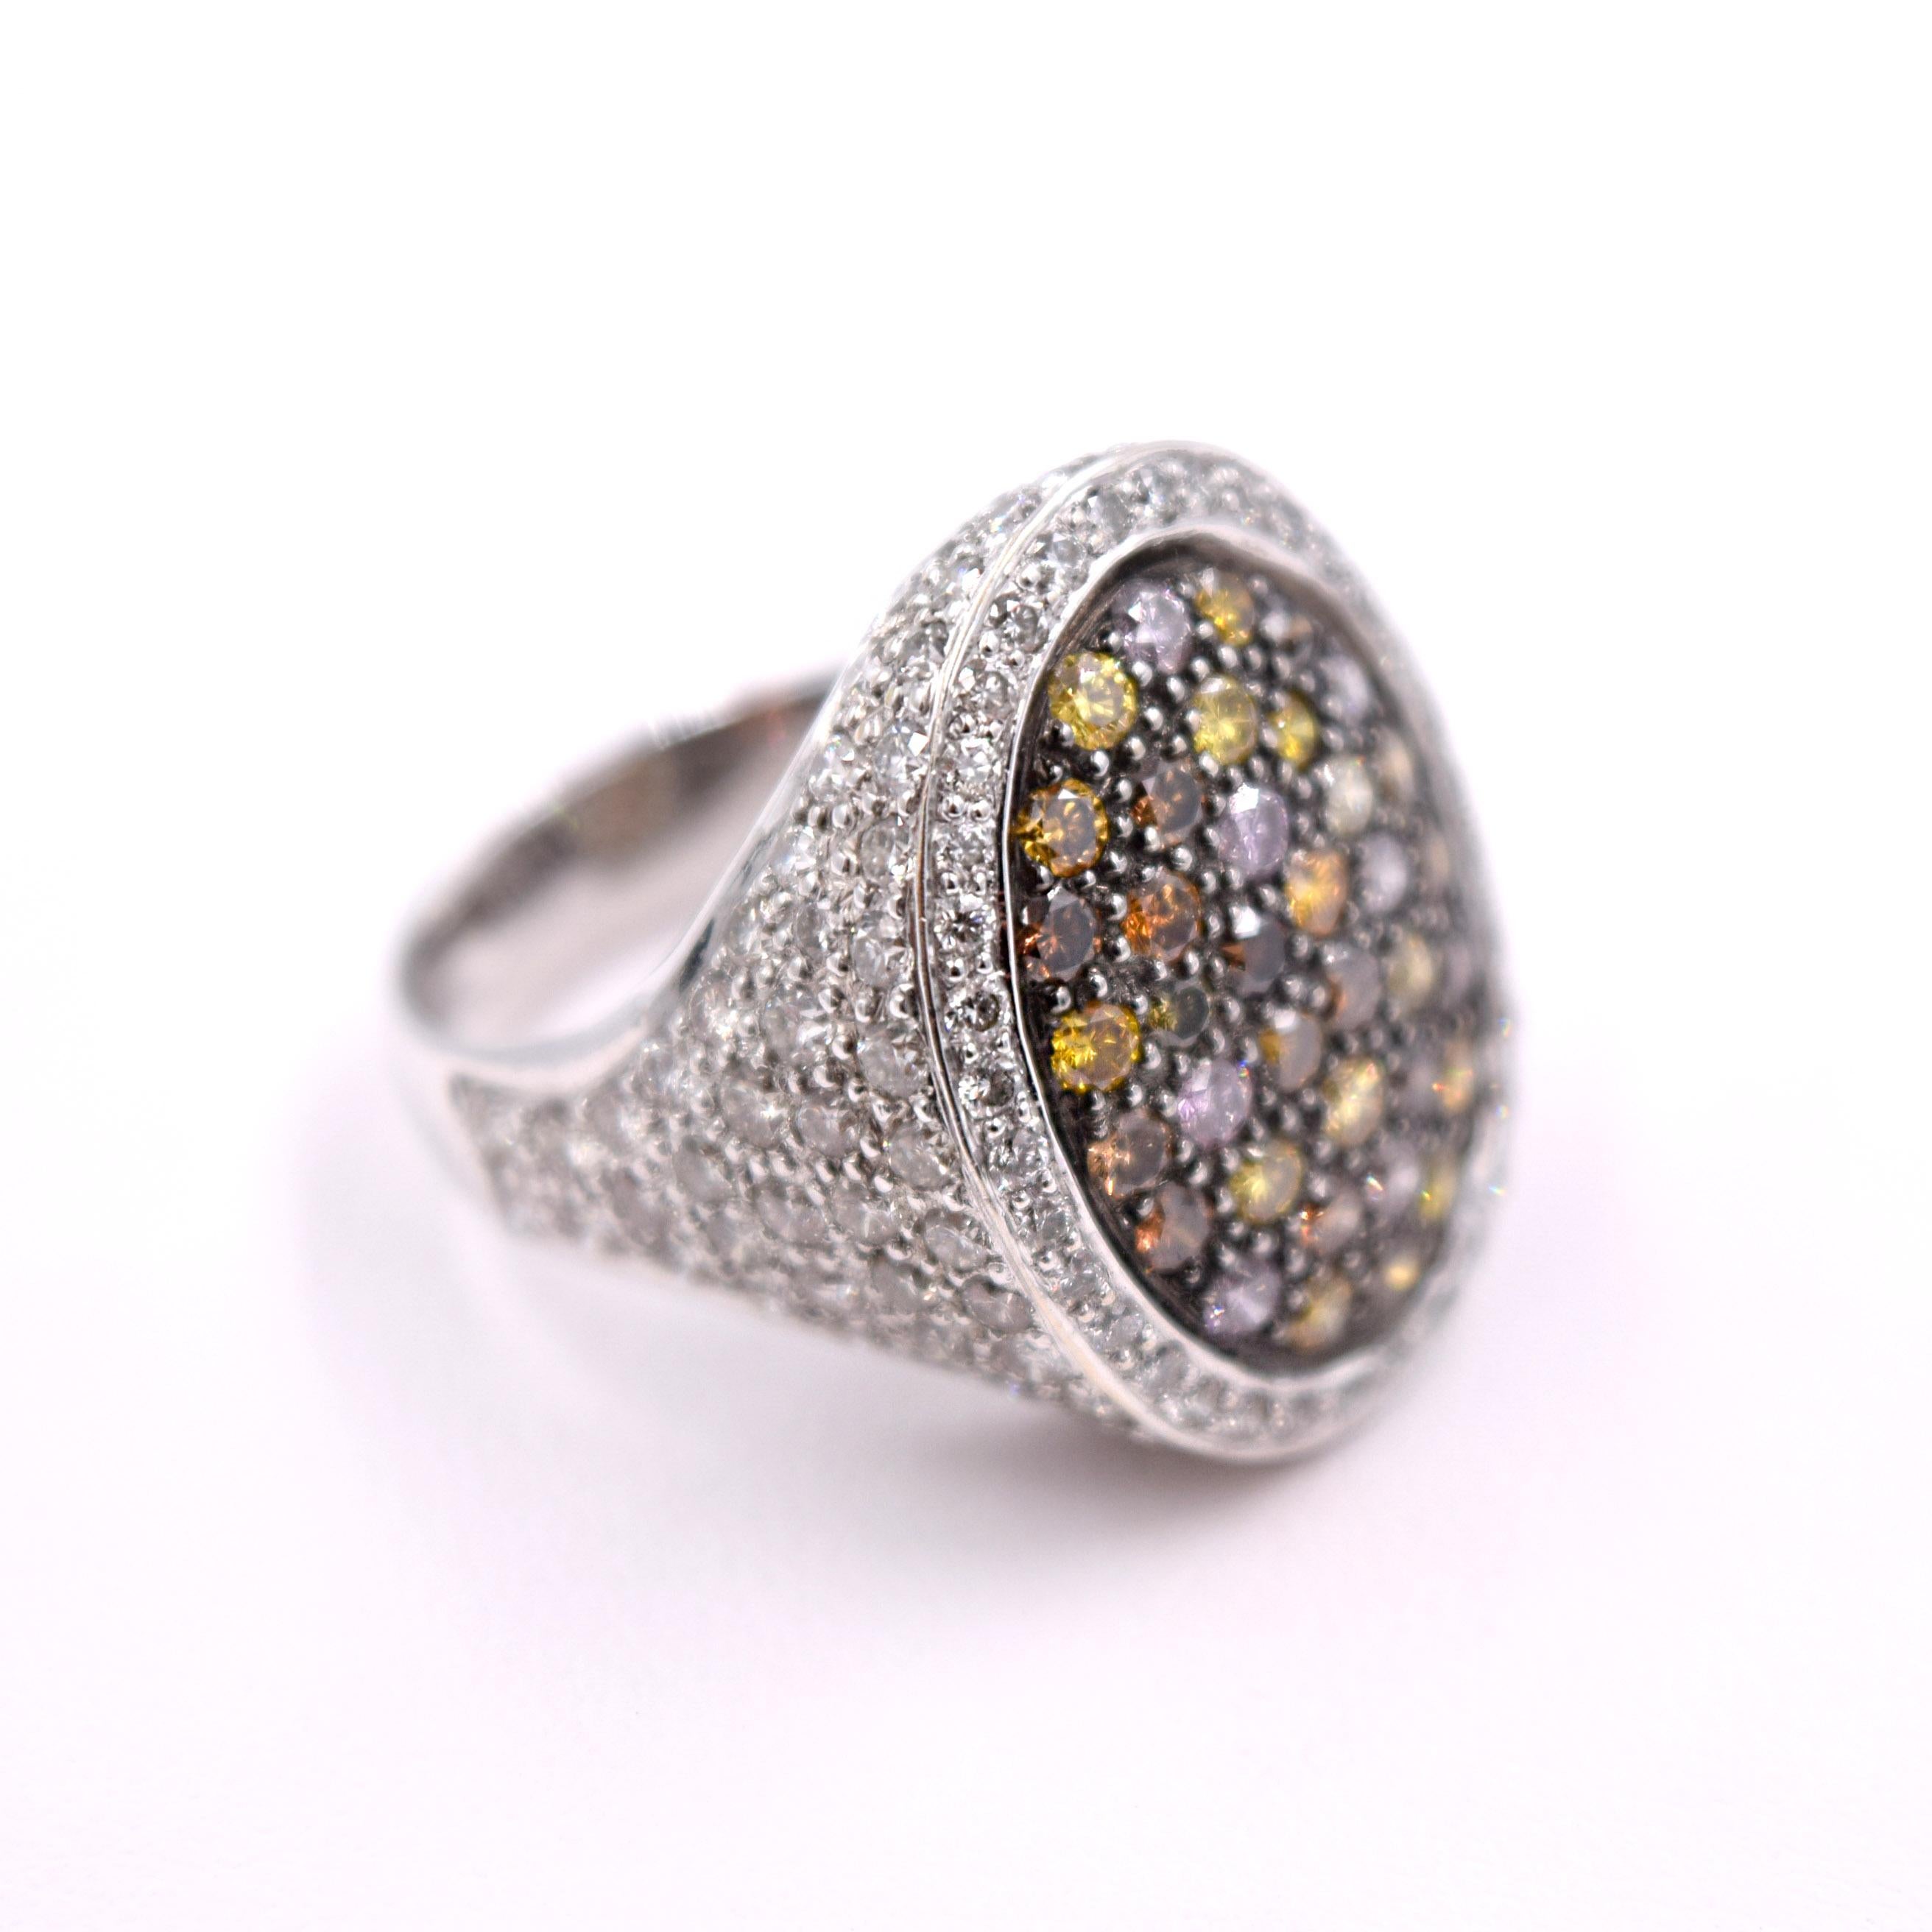 Contemporary Sethi Couture 4.45 Carat Multicolored Diamond Cocktail Ring in 18 Karat Gold For Sale